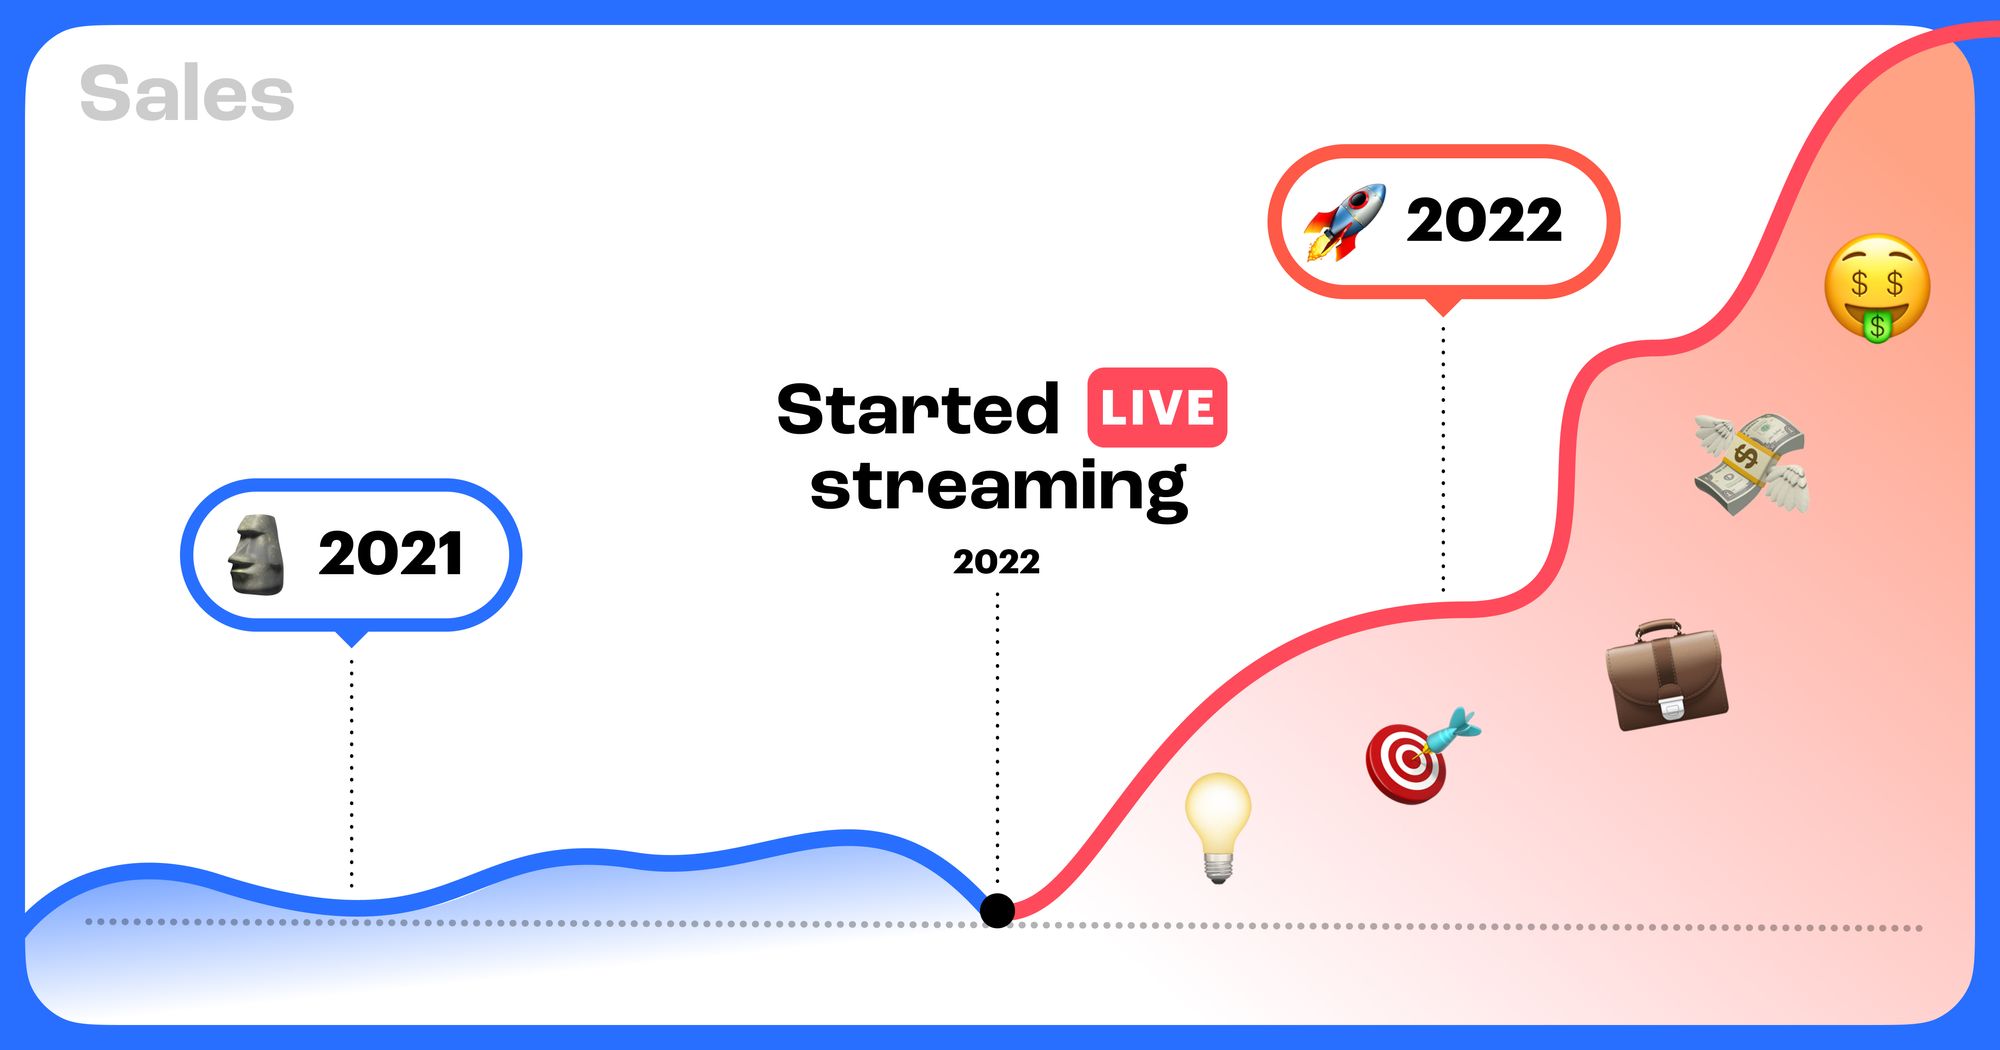 How to use live stream marketing to grow your business